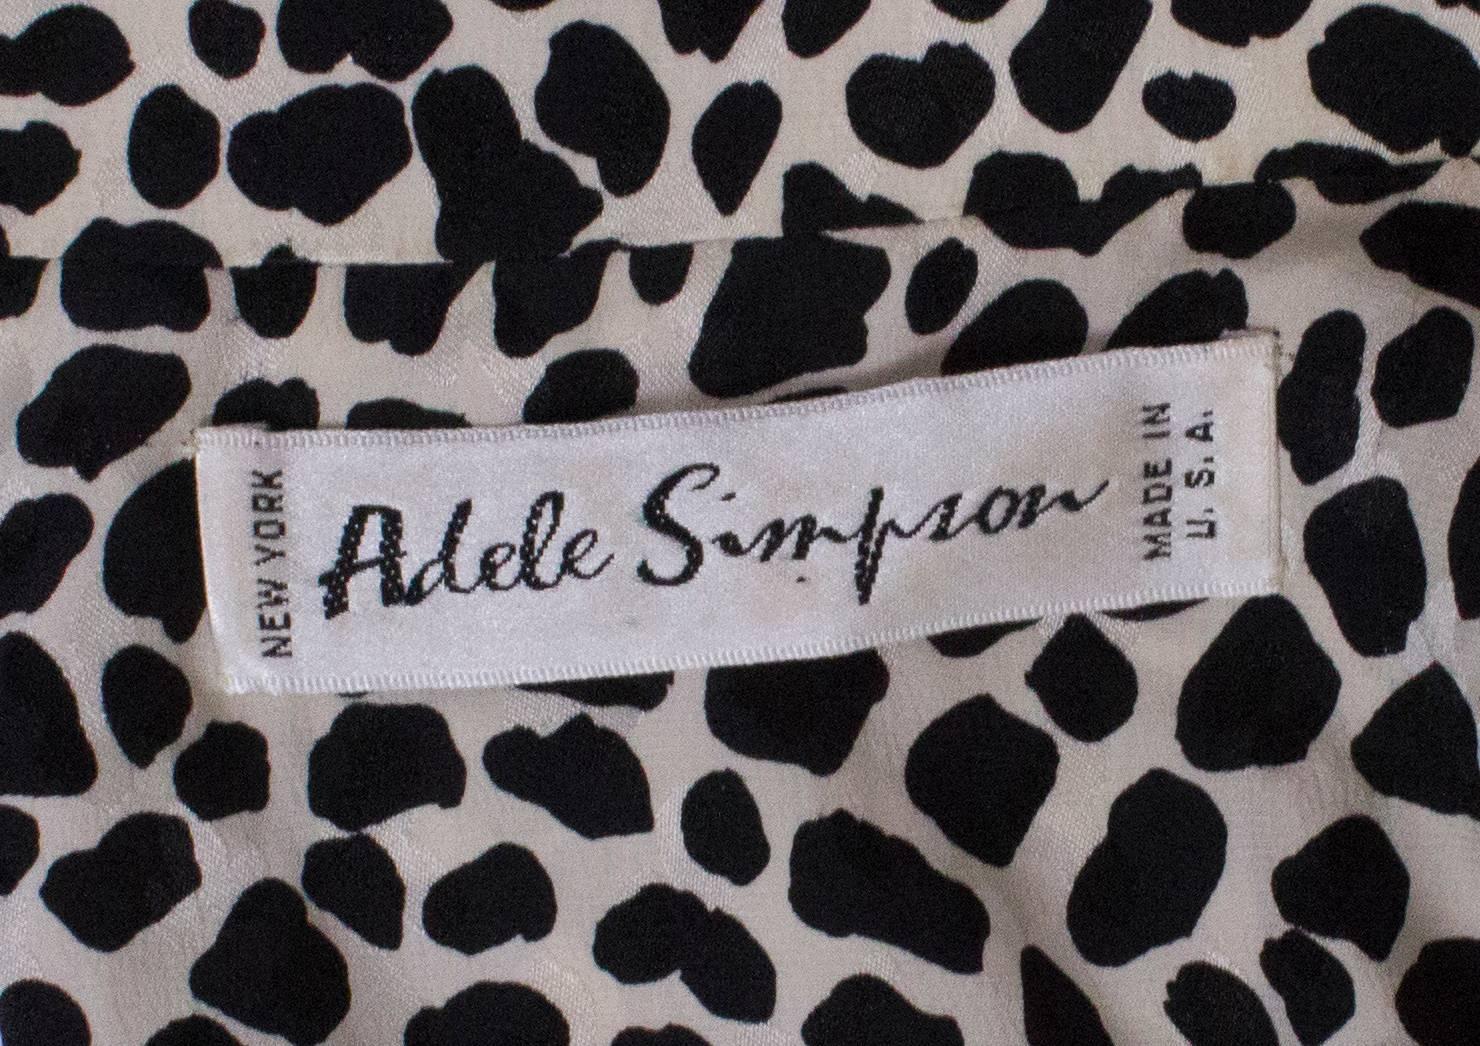 A Vintage 1980s Black and White printed Dress with bow detail by Adele Simpson 5